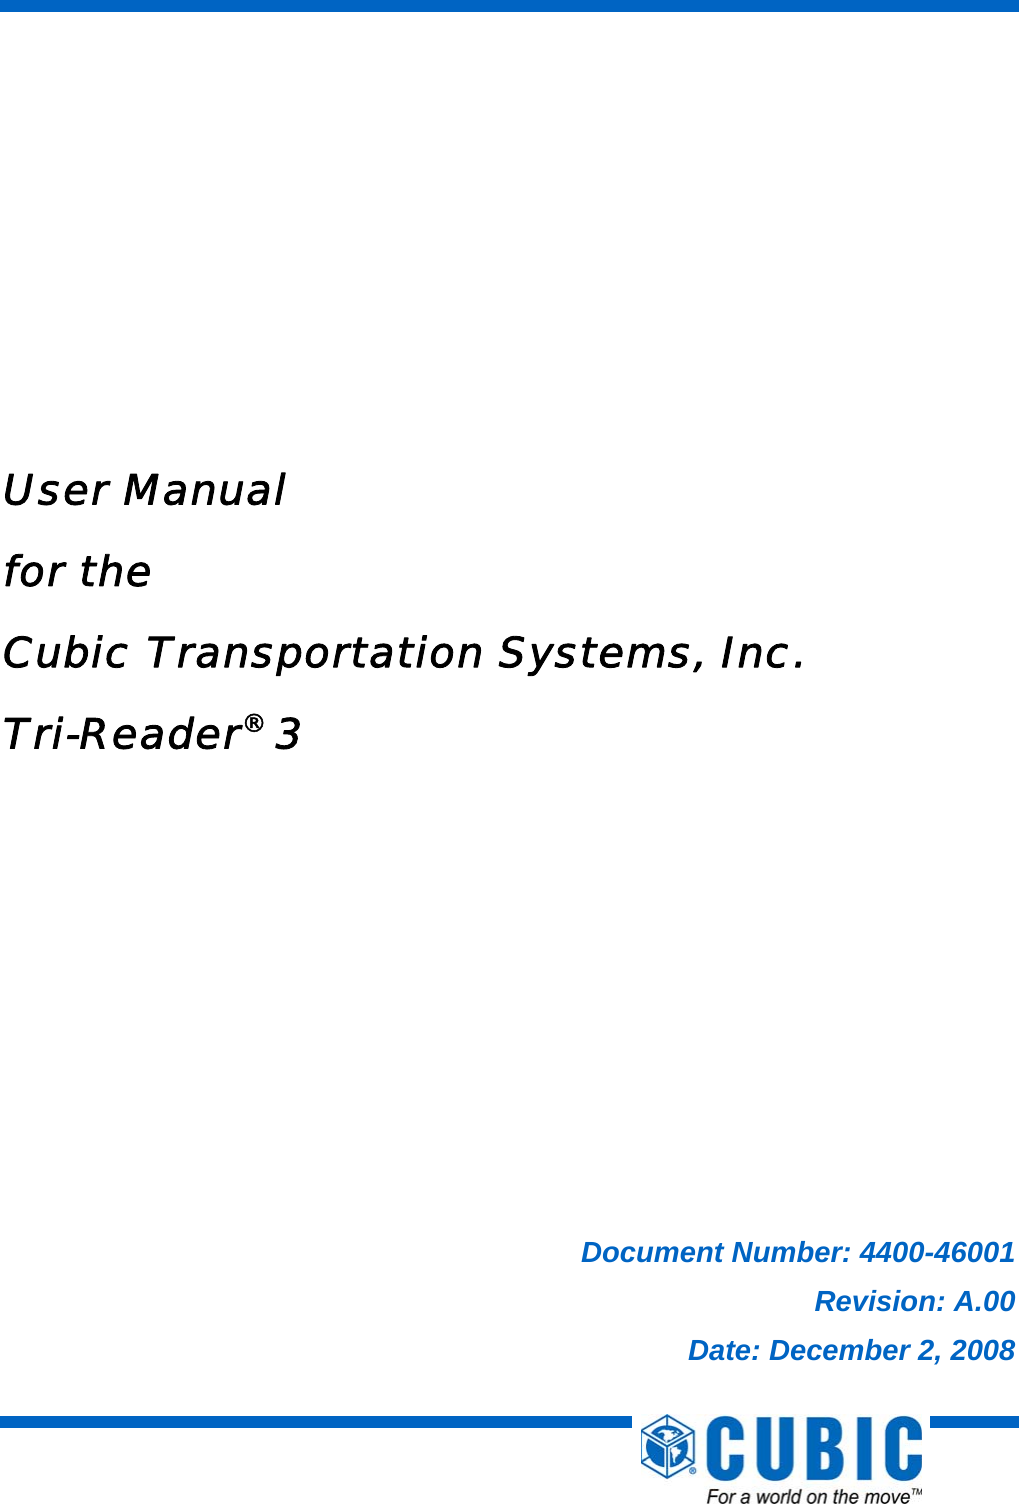      User Manual for the Cubic Transportation Systems, Inc. Tri-Reader® 3           Document Number: 4400-46001 Revision: A.00 Date: December 2, 2008 